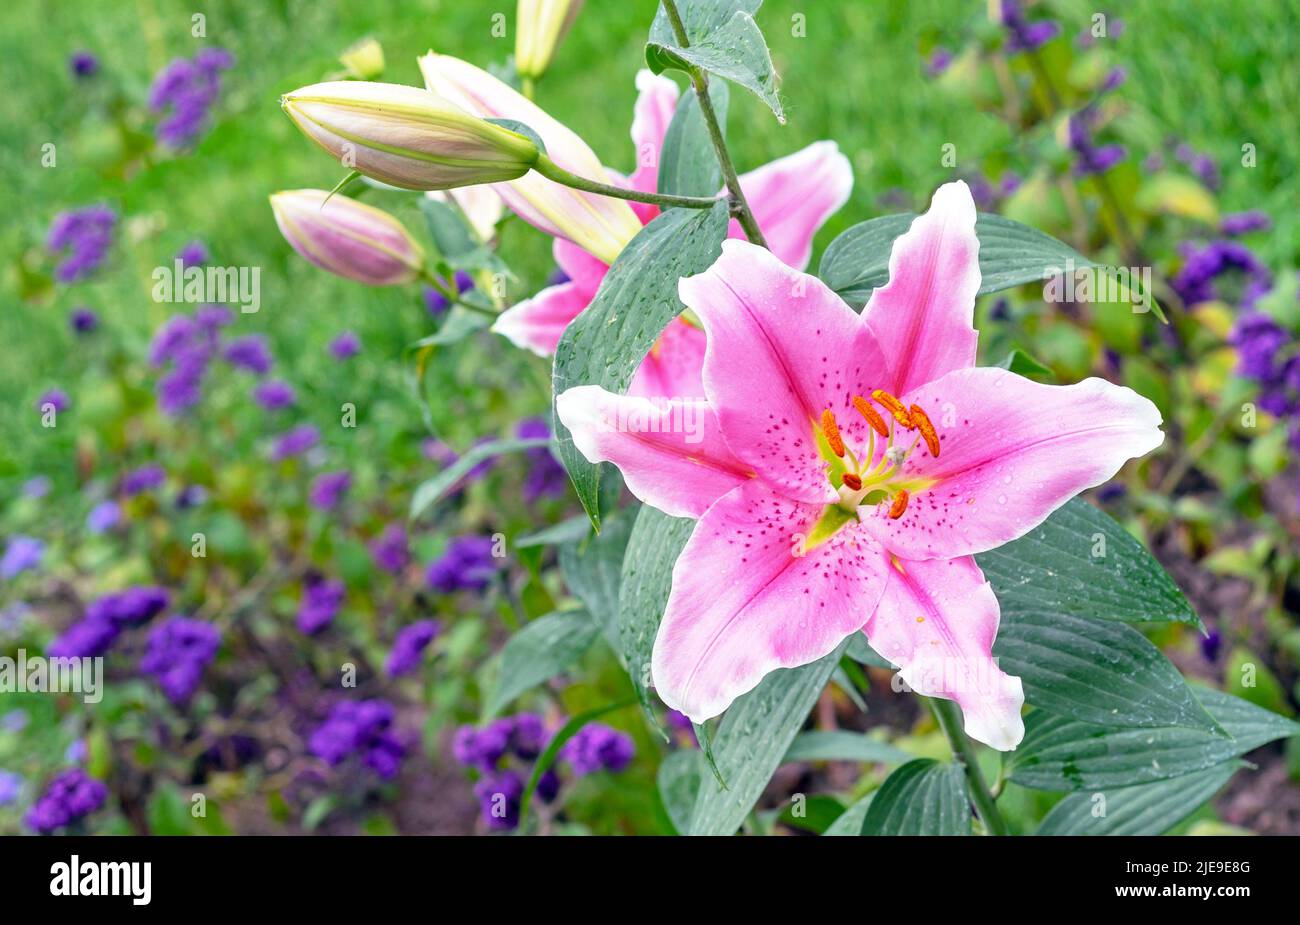 Beautiful pink lily close-up. Lily blossom in the summer garden. Stock Photo